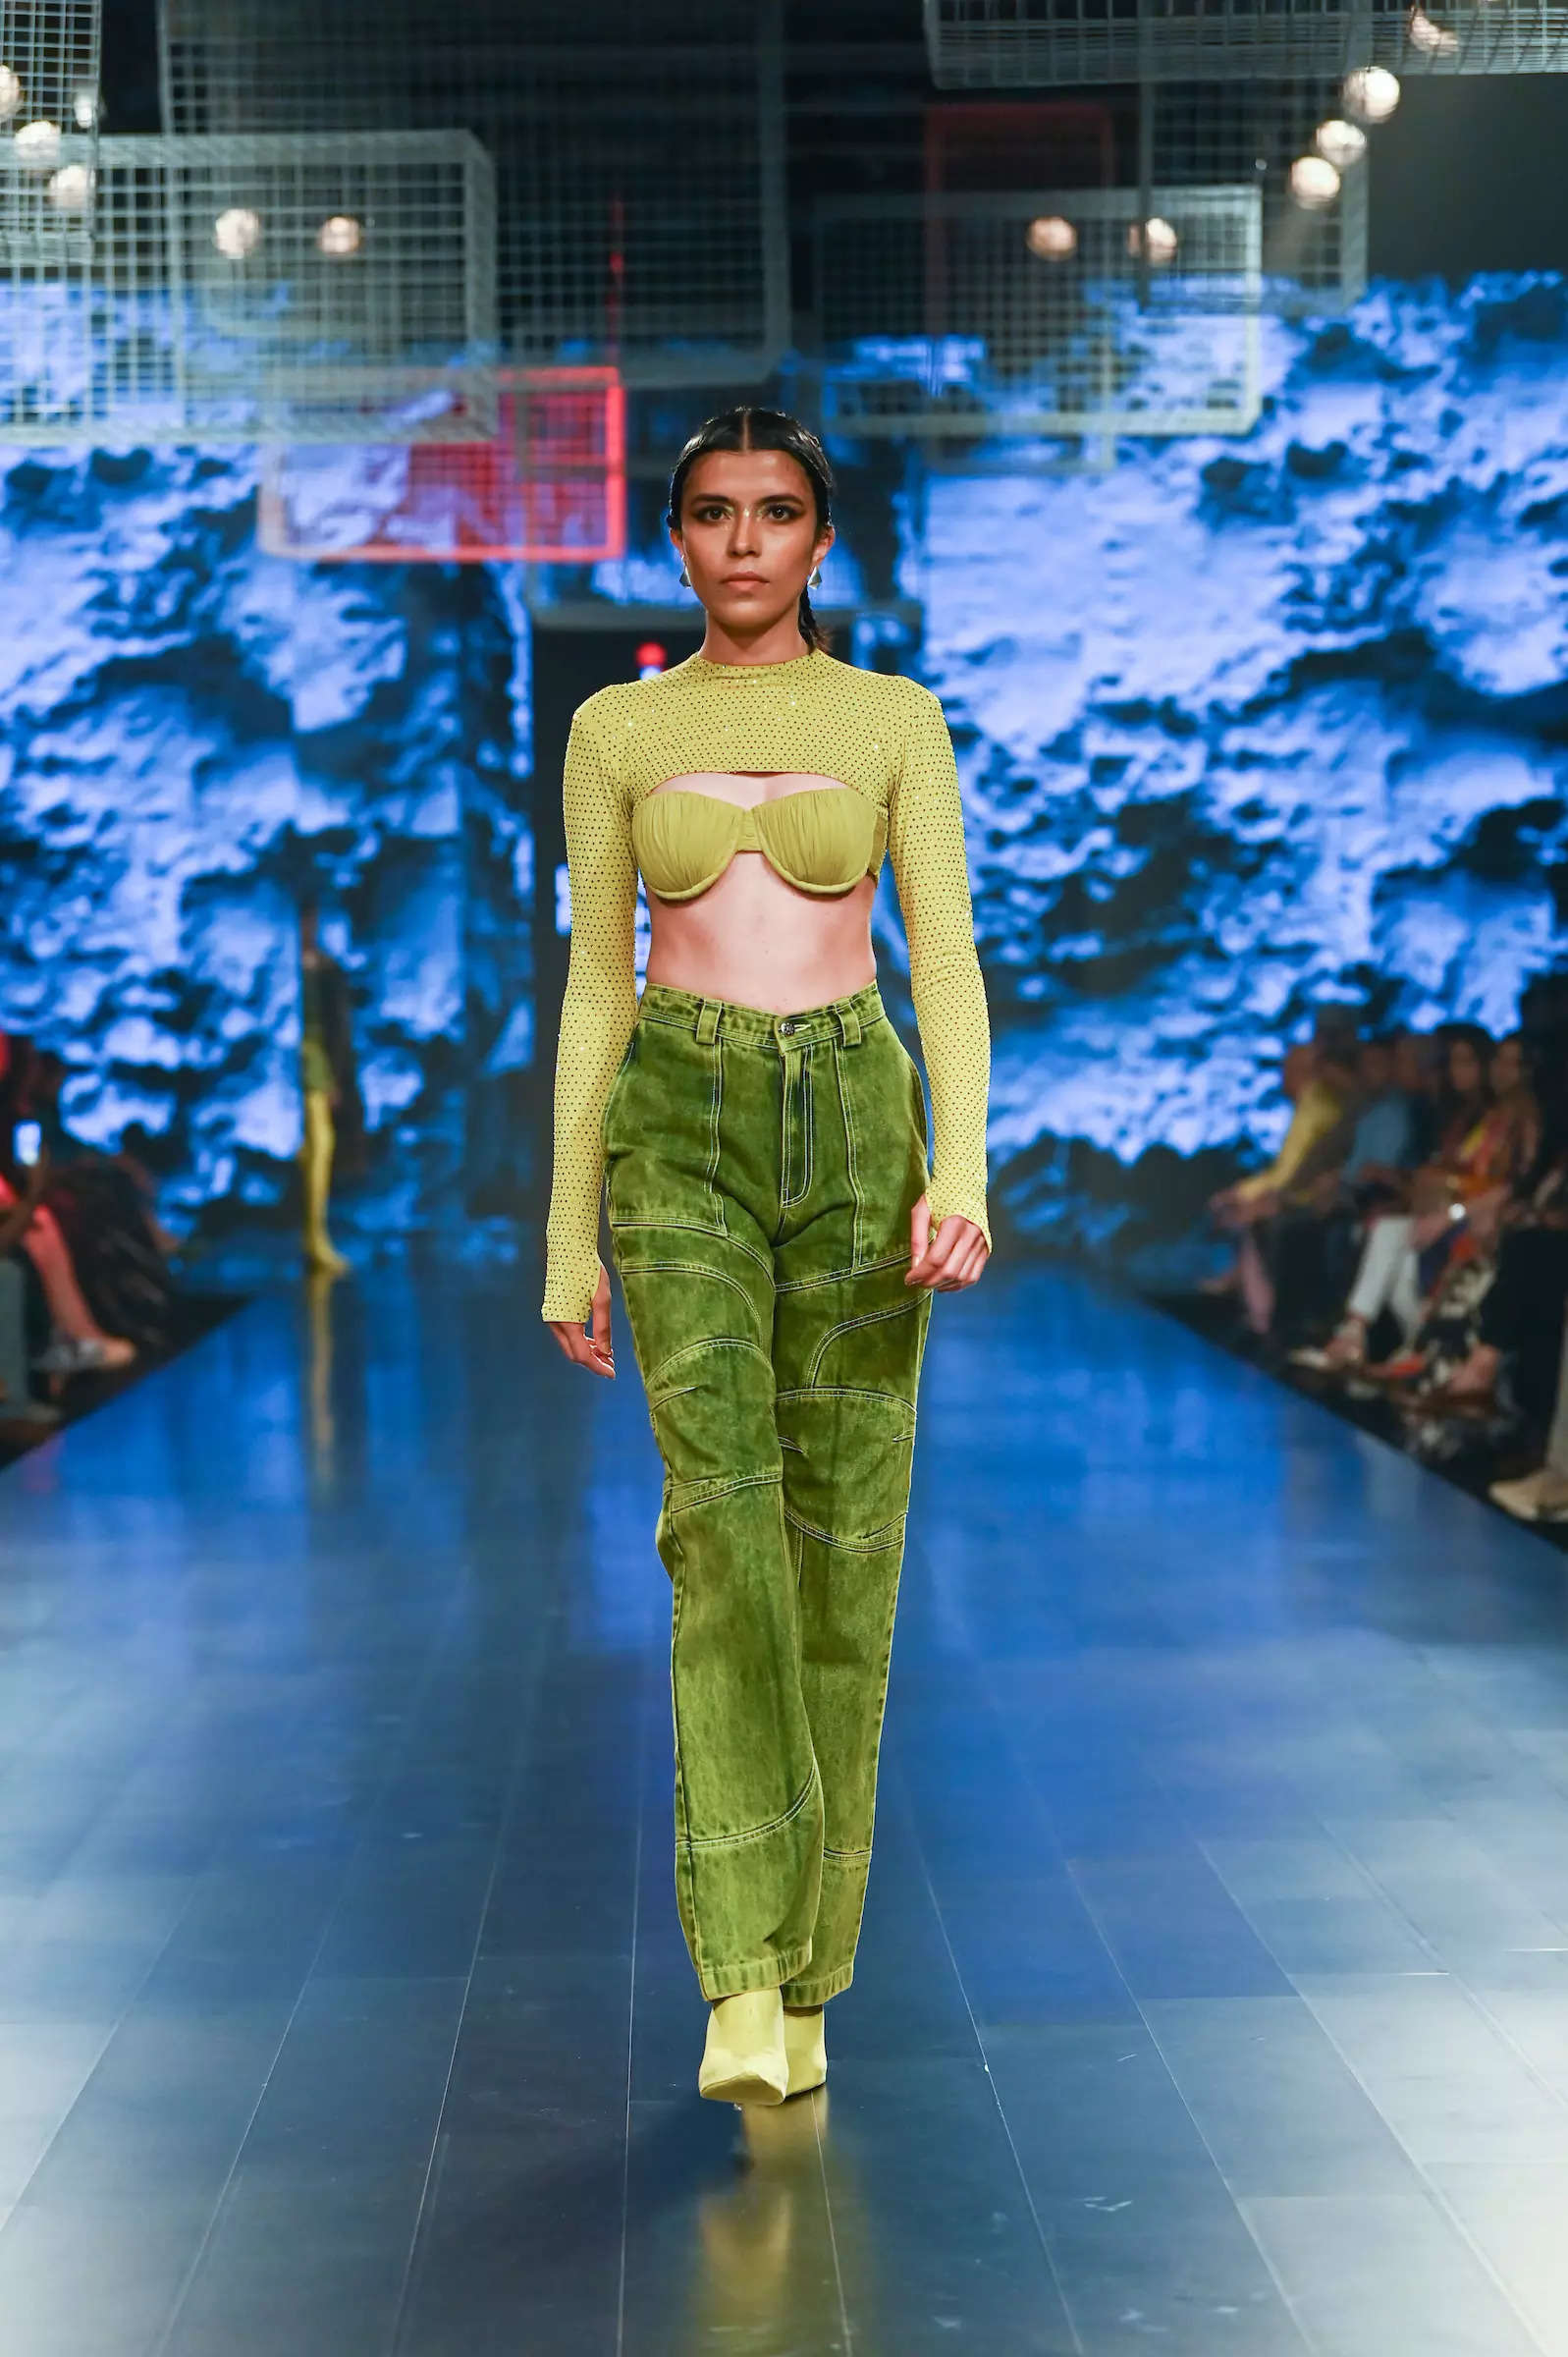 HIRO for INIFD presents GenNext at LFW x FDCI Mar 23